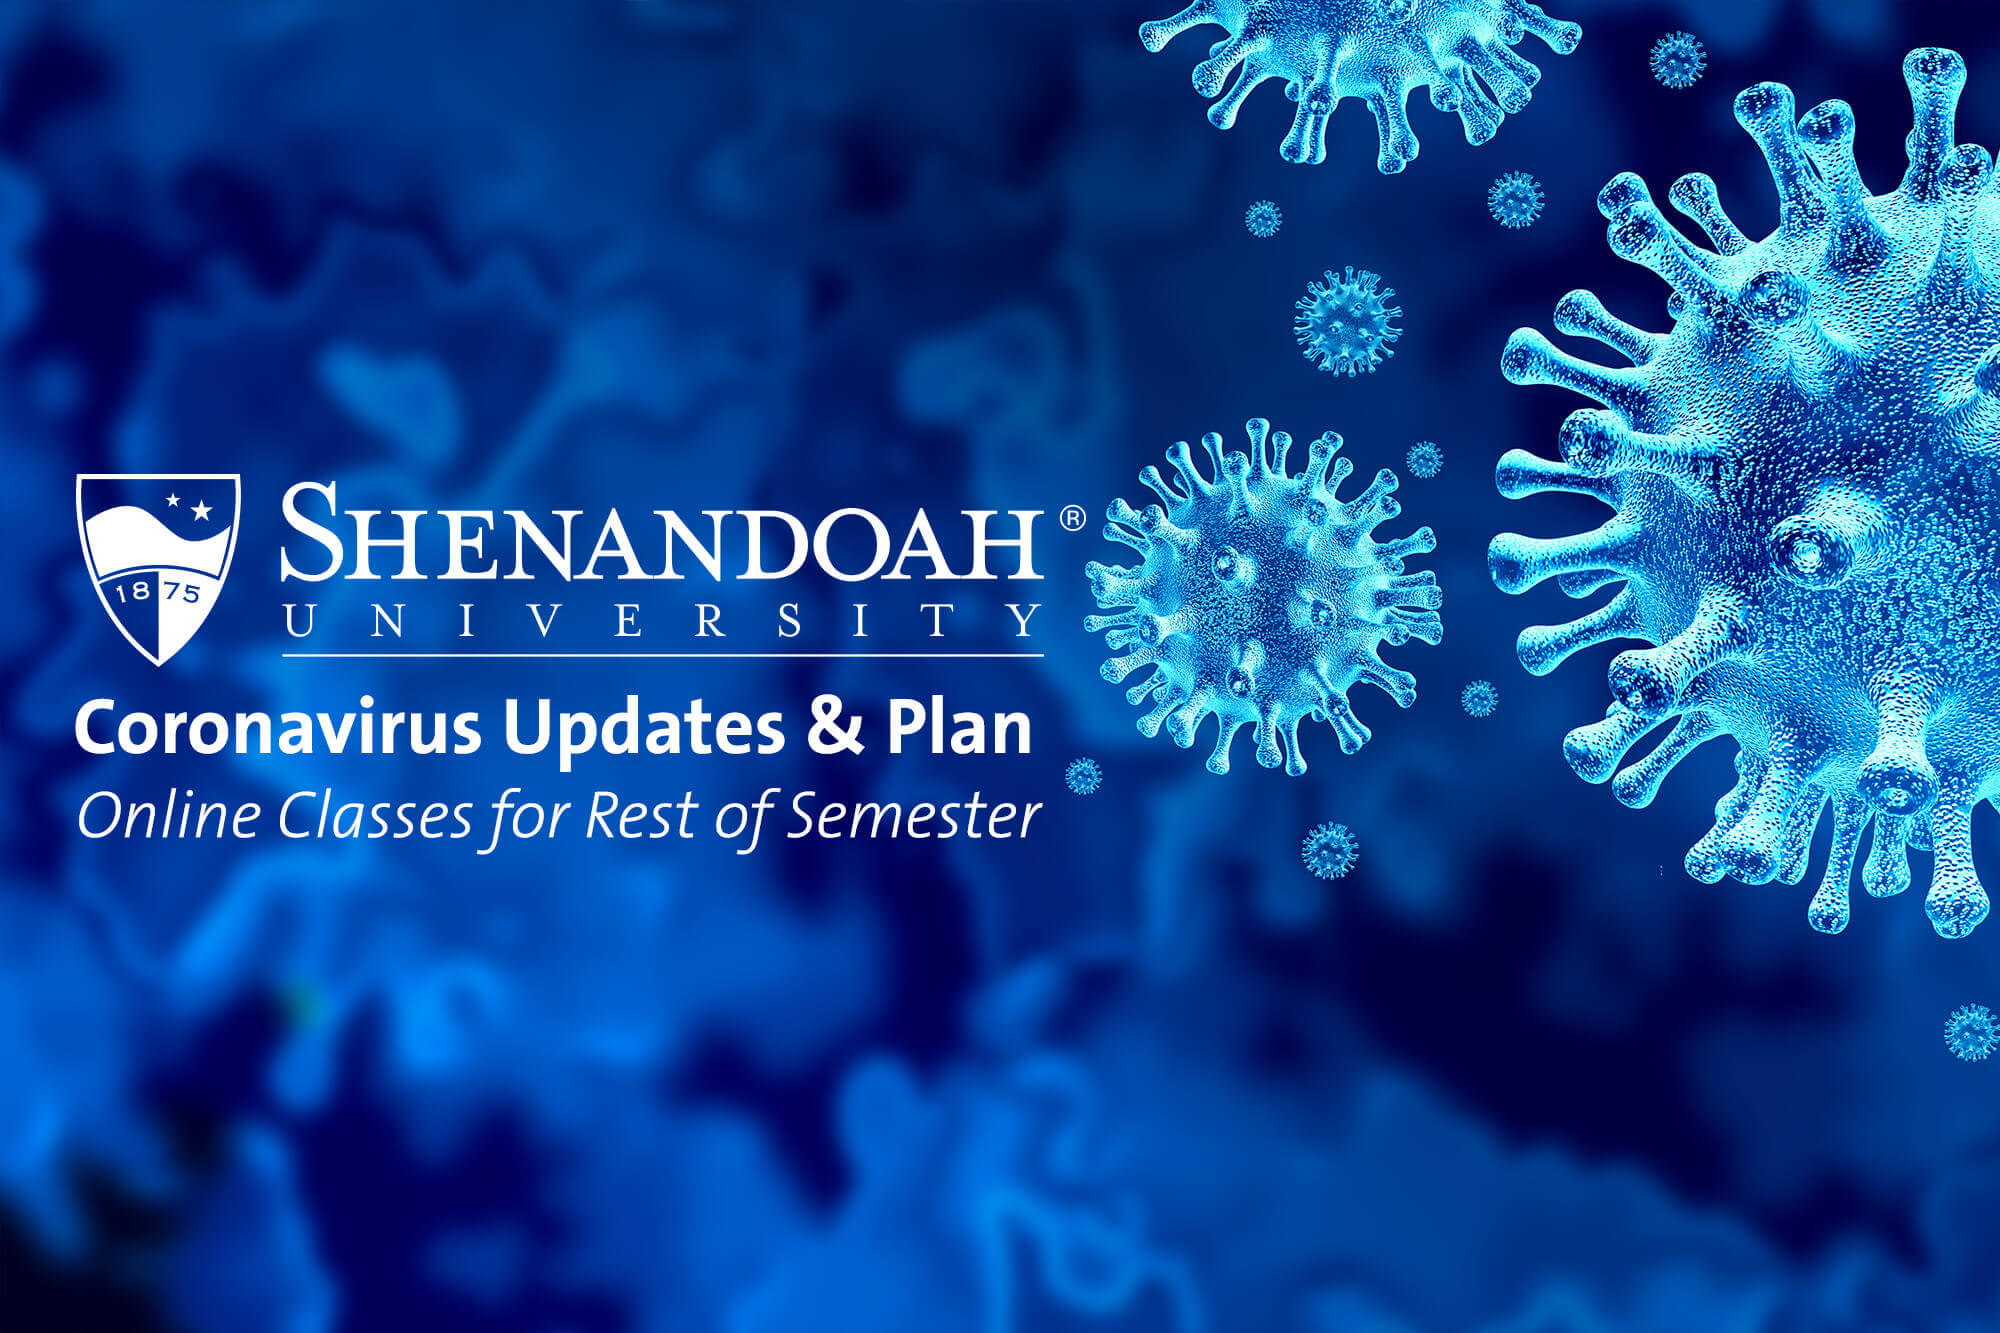 Online Classes for Rest of Semester, Working Remotely, Commencement & Other Updates Shenandoah is taking the additional actions, effective immediately